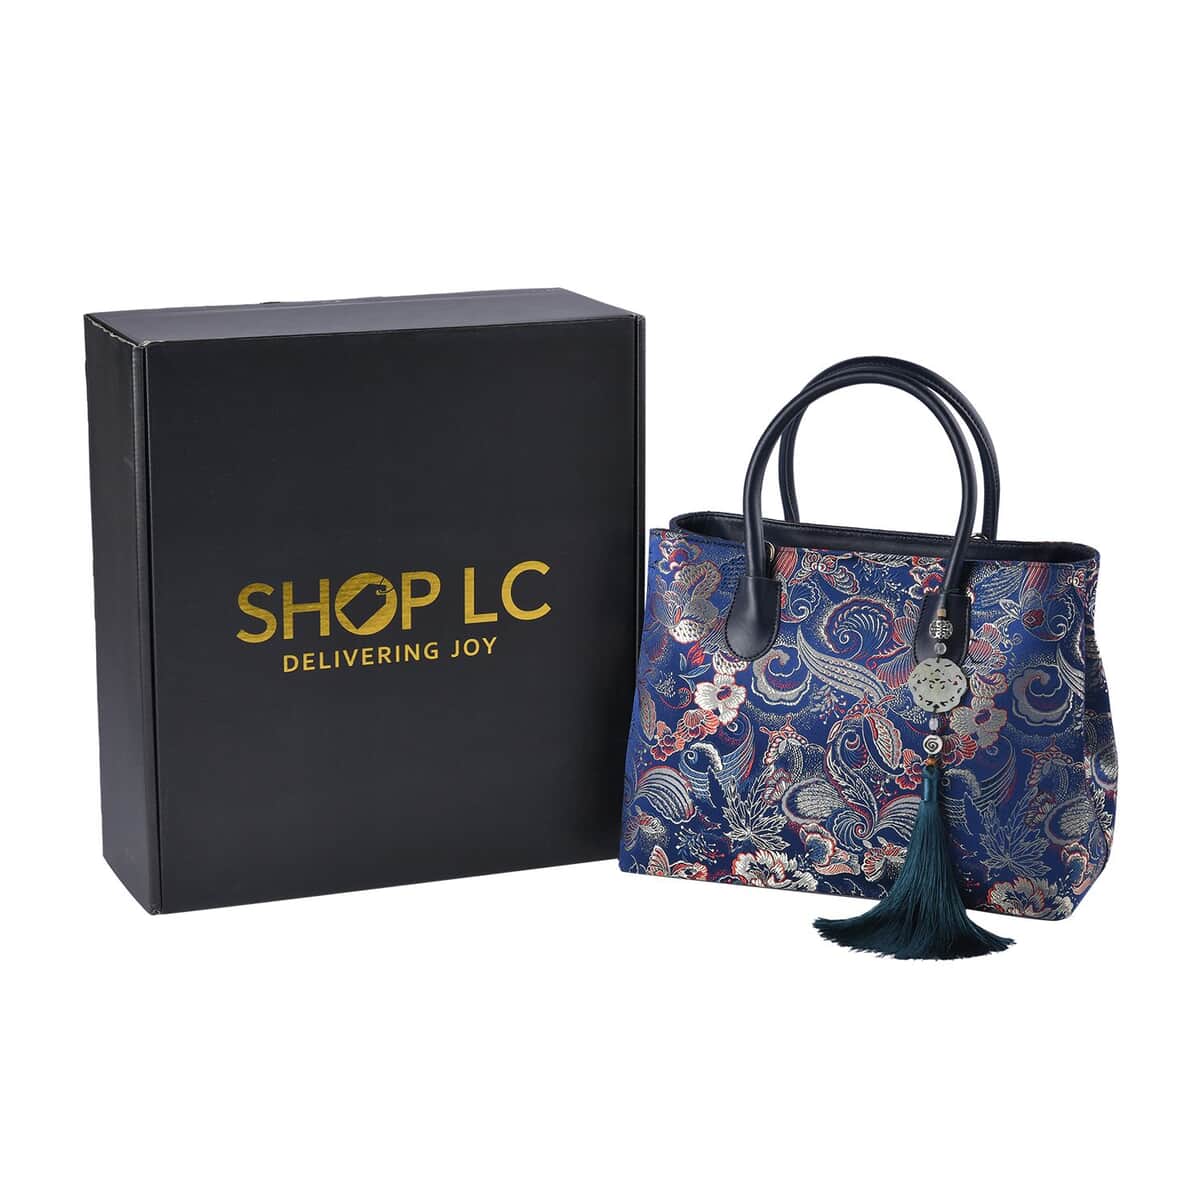 Navy Phoenix tail Flower Pattern Brocade with Genuine Leather Crossbody Bag (12.91"x9.84"x5.51") with Shoulder Strap image number 6